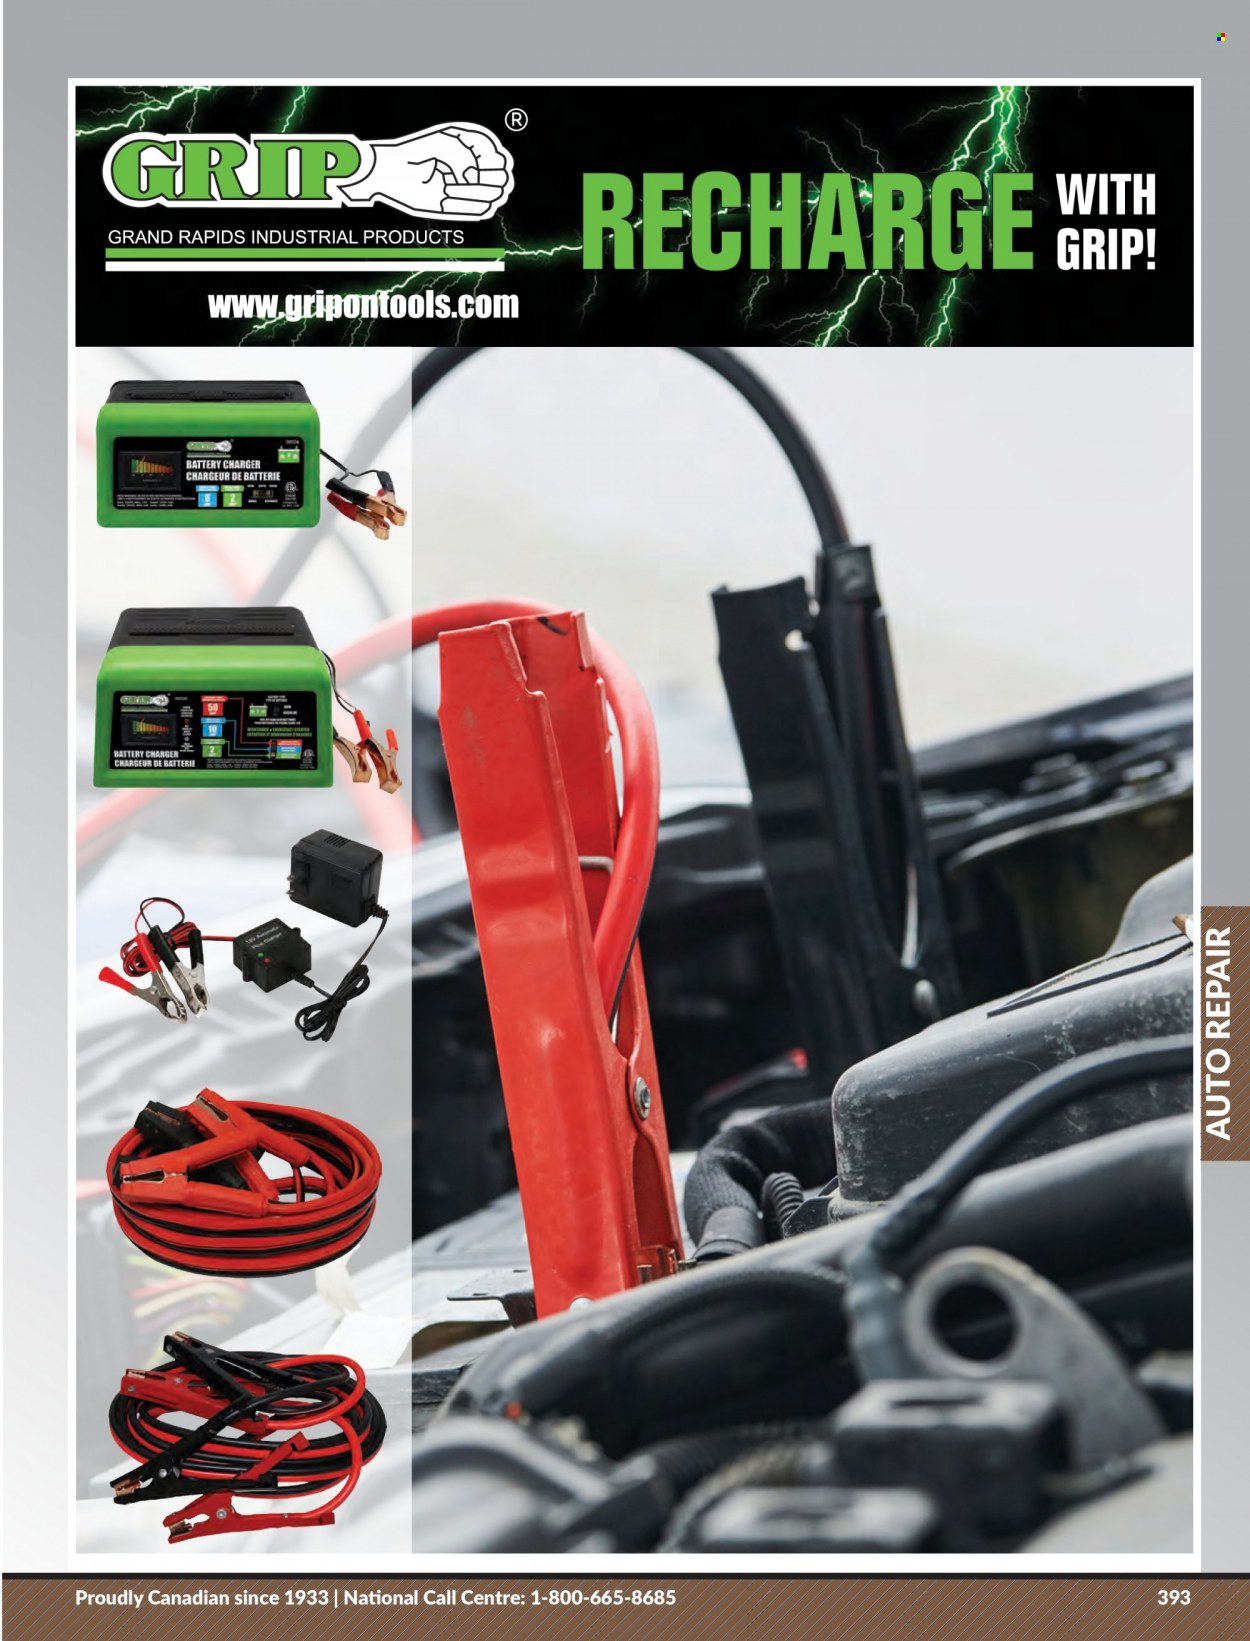 Princess Auto Flyer - Sales products - battery charger. Page 401.